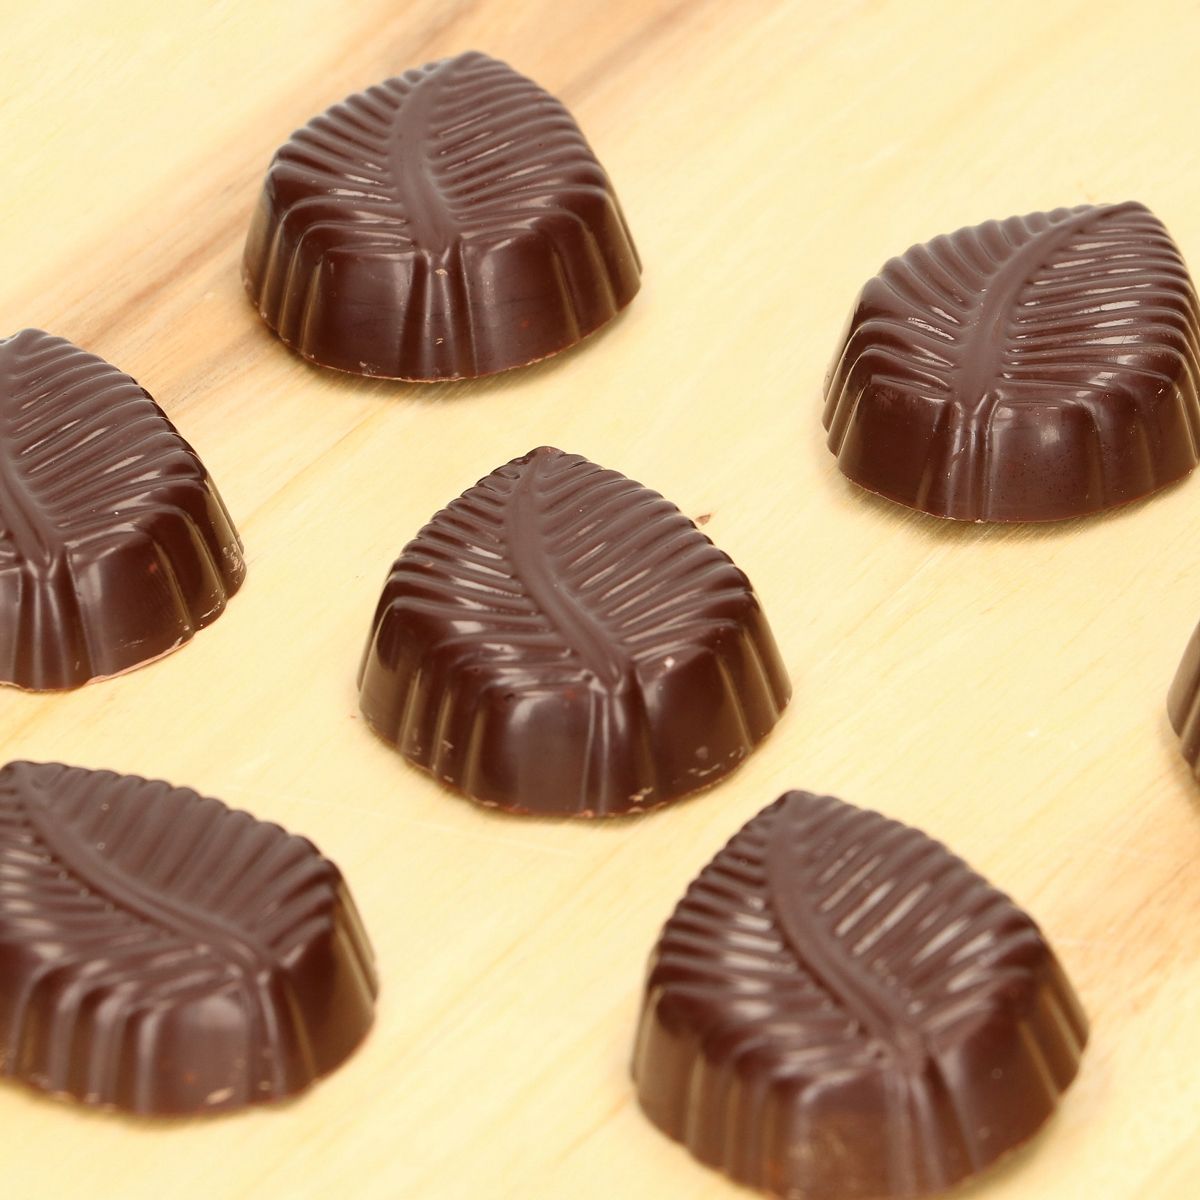 FUNCAKES CHOCOLATE MOULD - Leaves